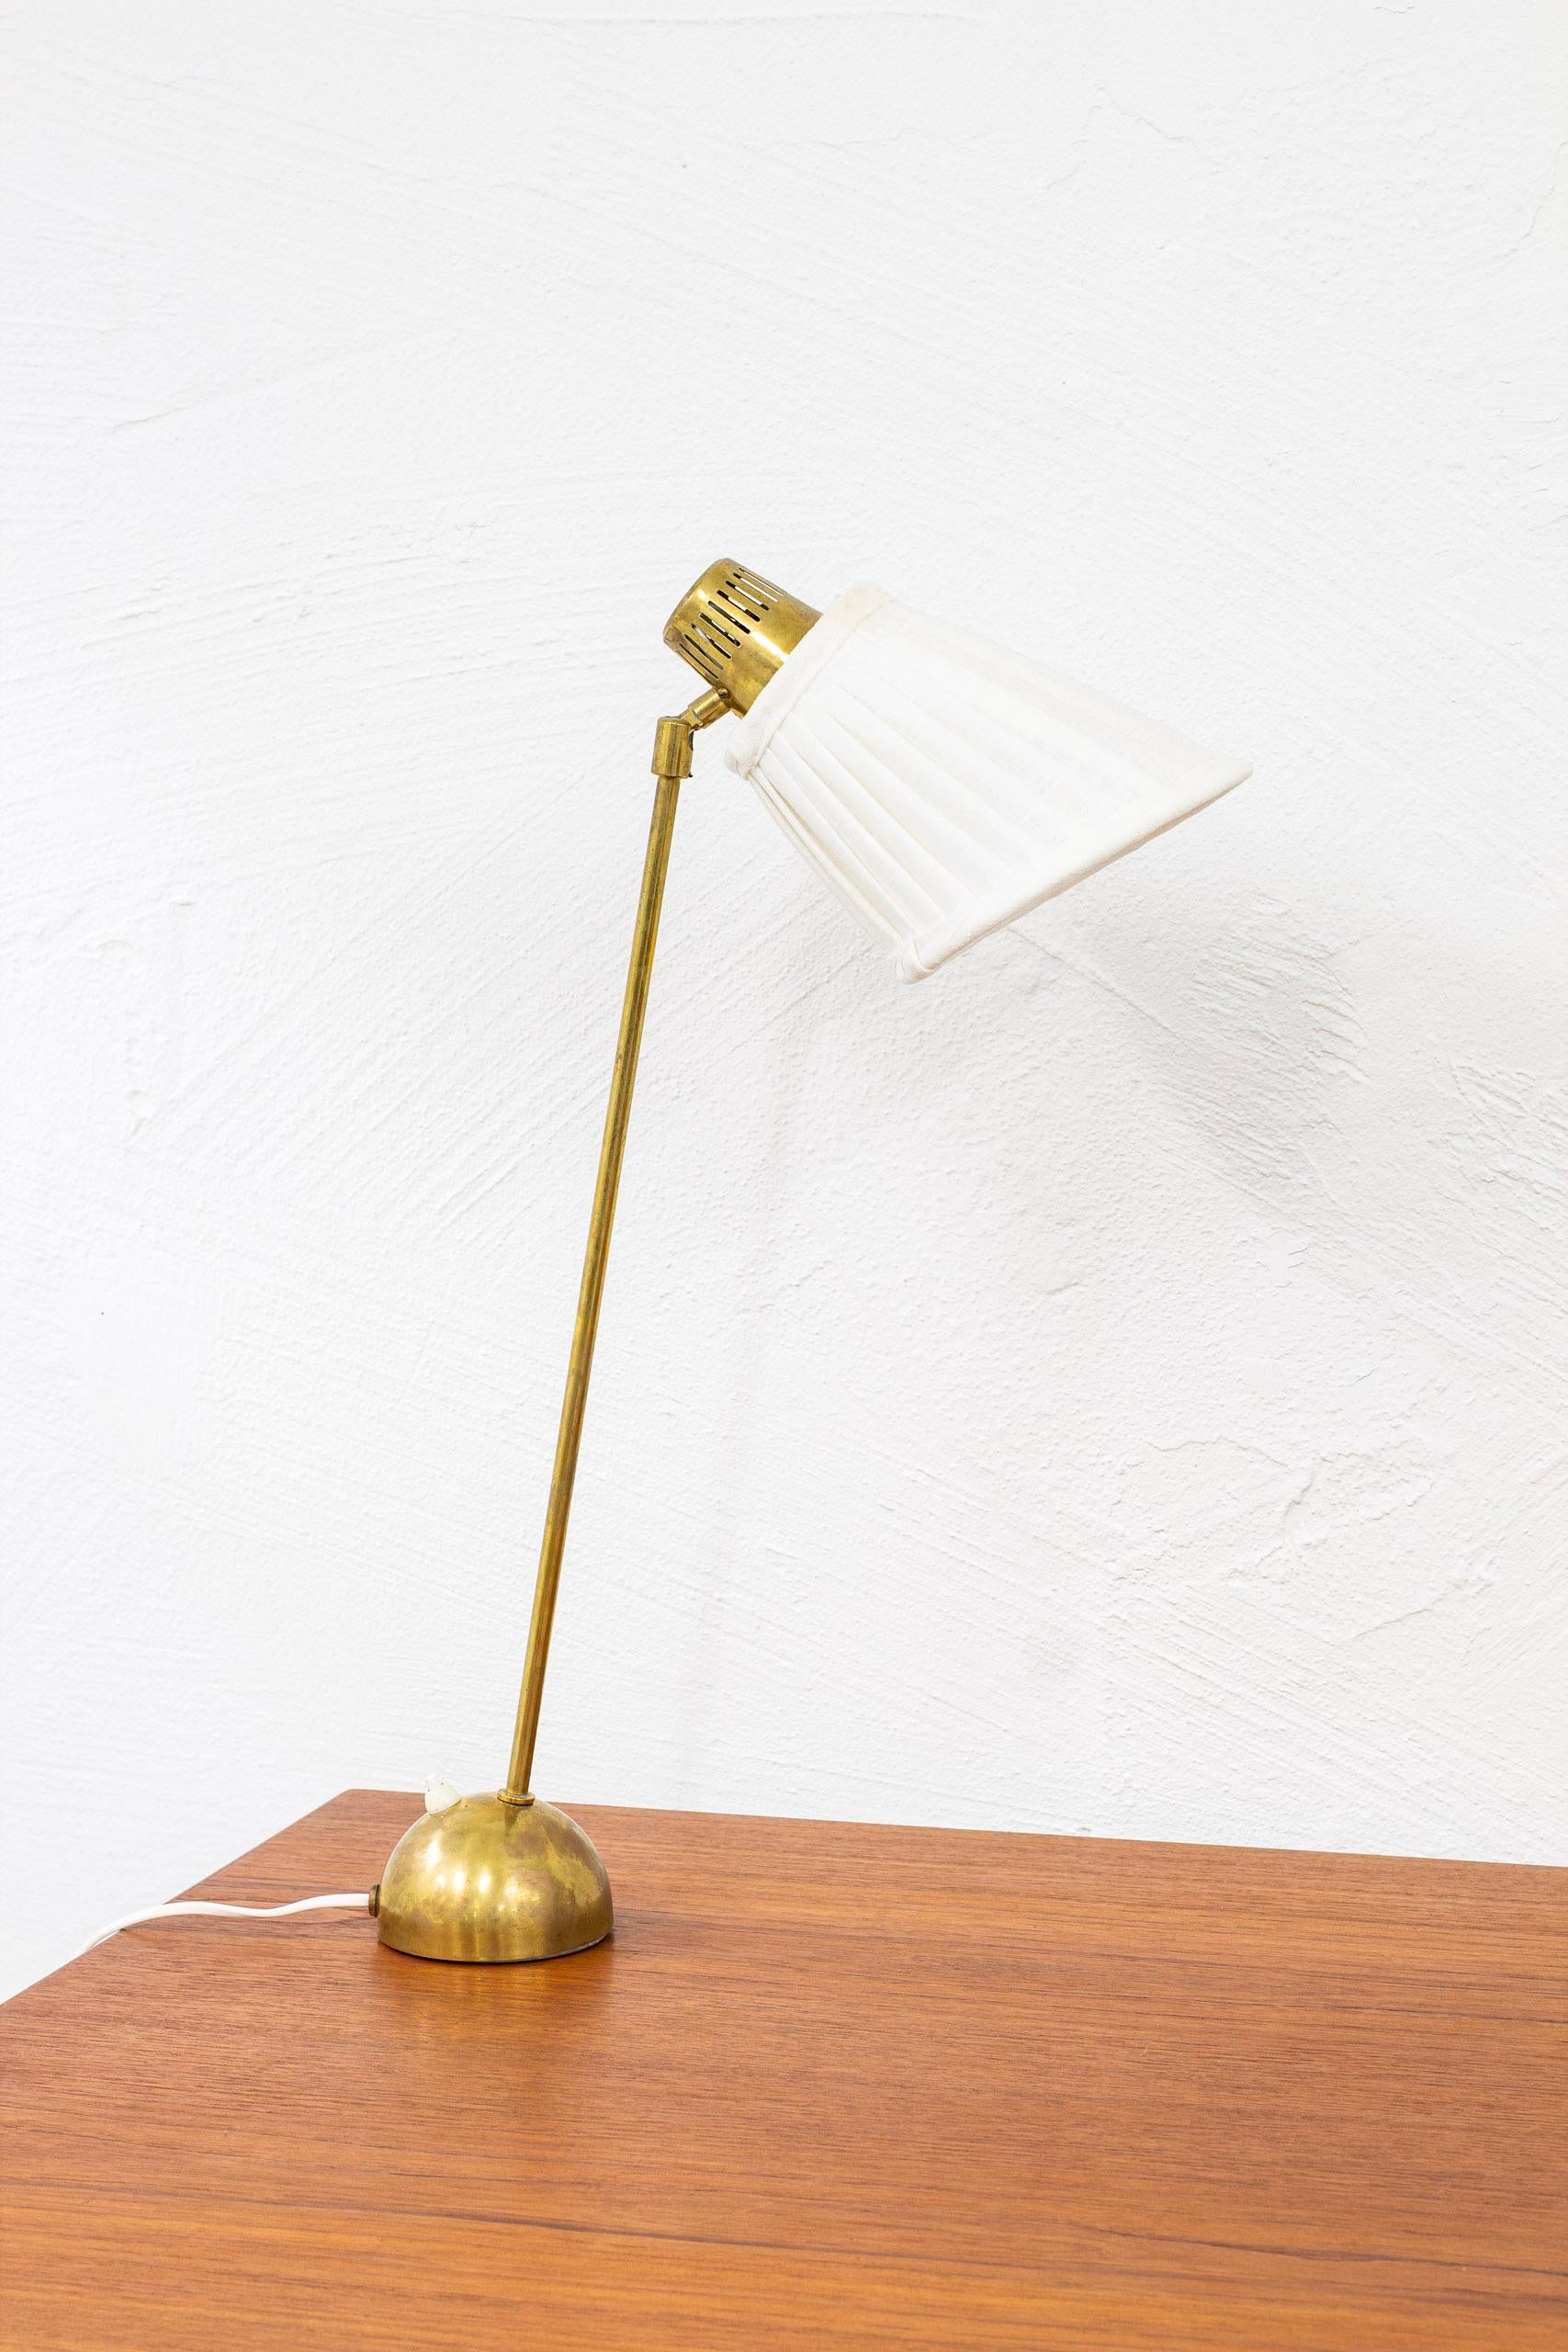 Table lamp model 712 designed by Hans Bergström. Produced in Sweden by Ateljé Lyktan ca 1950. Made from brass with hand sewn, pleated, white fabric lamp shade. Angle of the shade is adjustable. Light switch on the lamp base in working order. Very